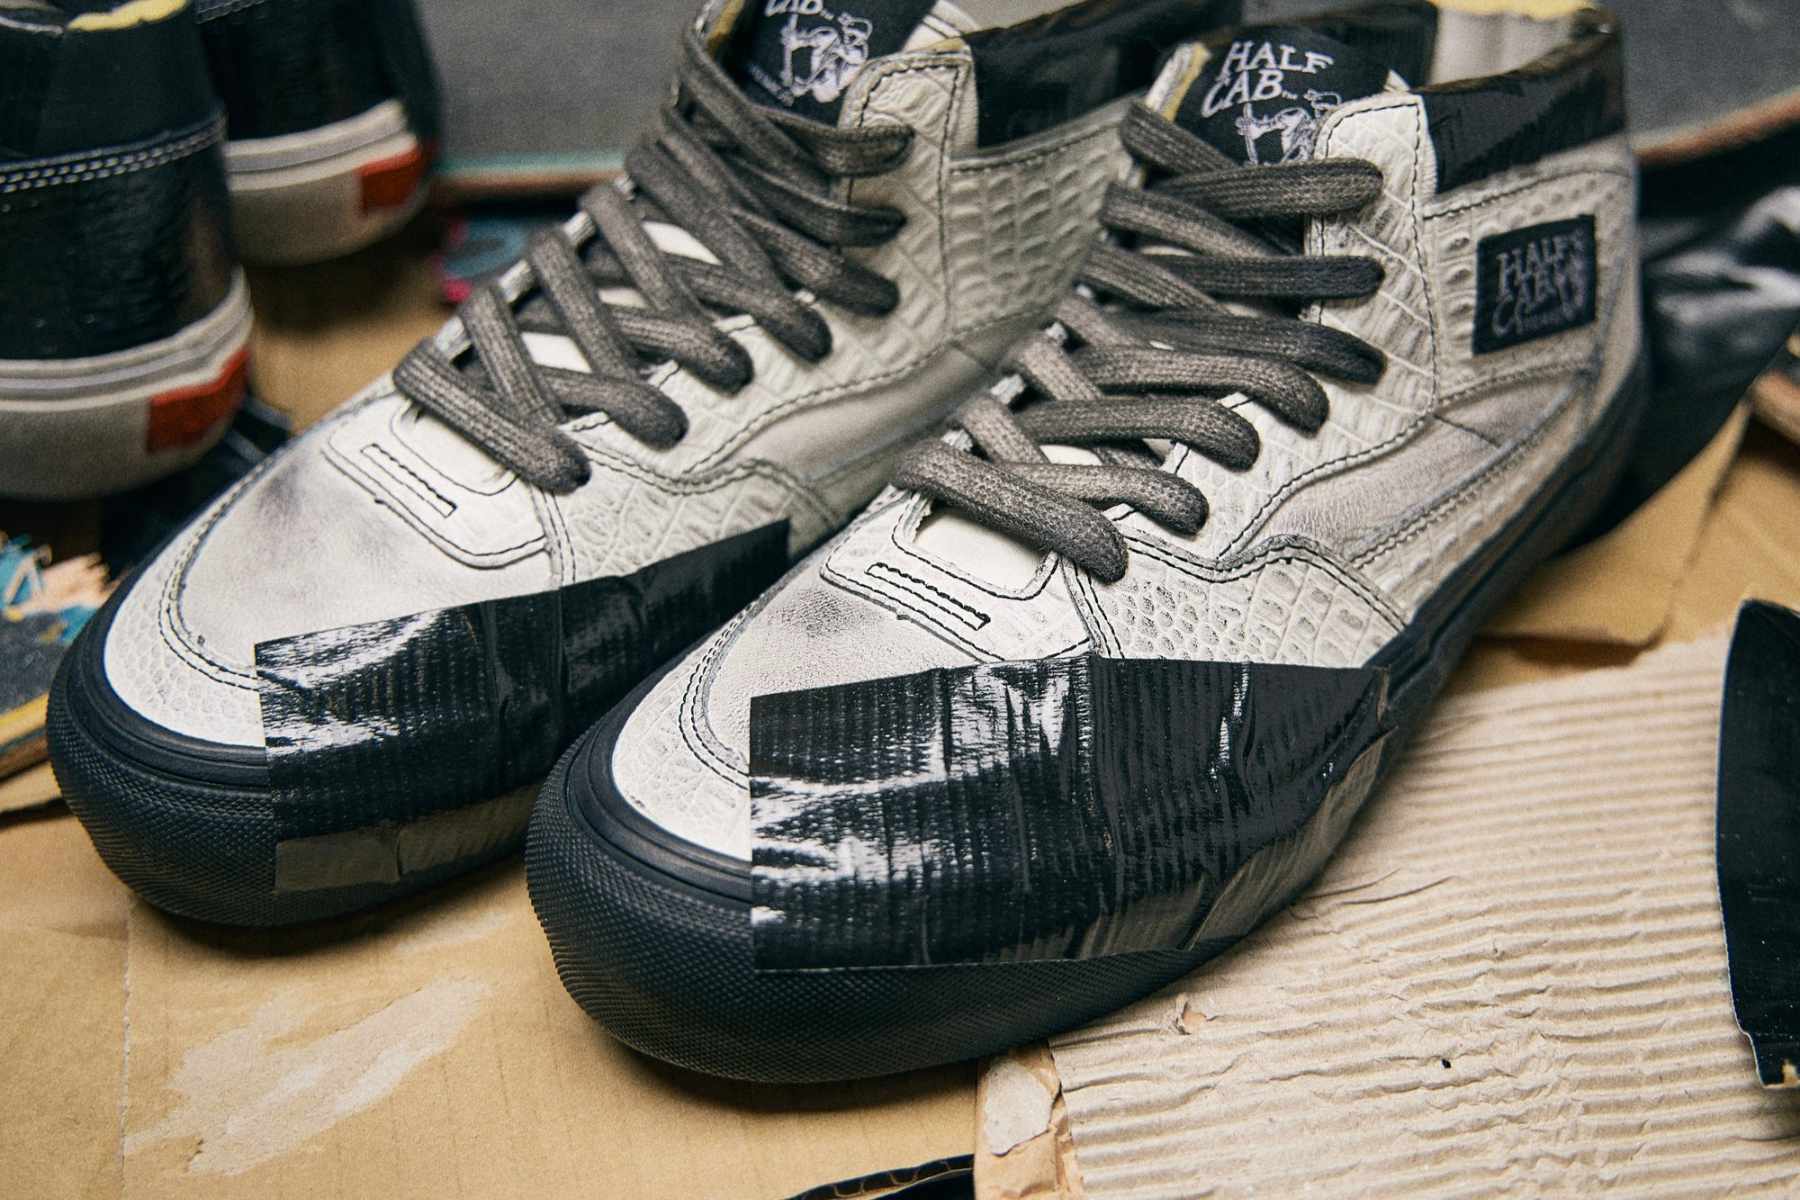 Vans' Distressed Skate Sneakers Come Covered in Duct Tape